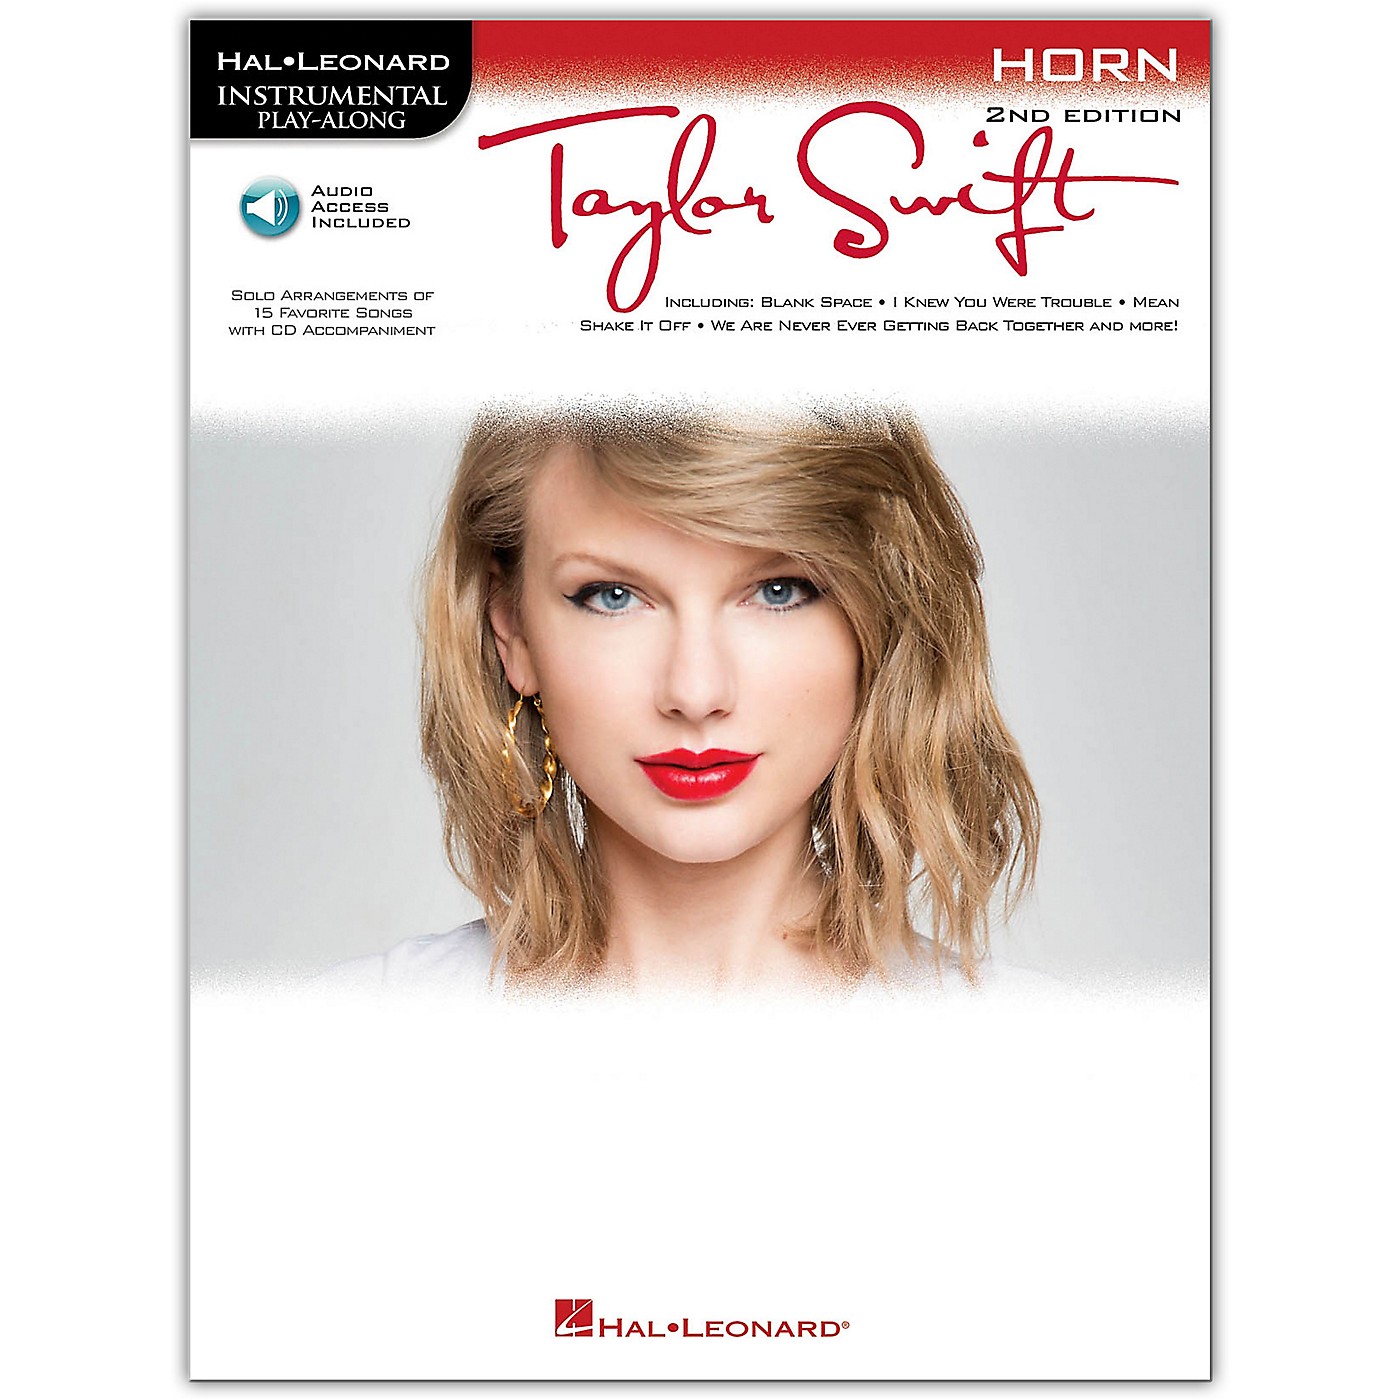 Hal Leonard Taylor Swift For Horn - Instrumental Play-Along 2nd Edition Book/Online Audio thumbnail